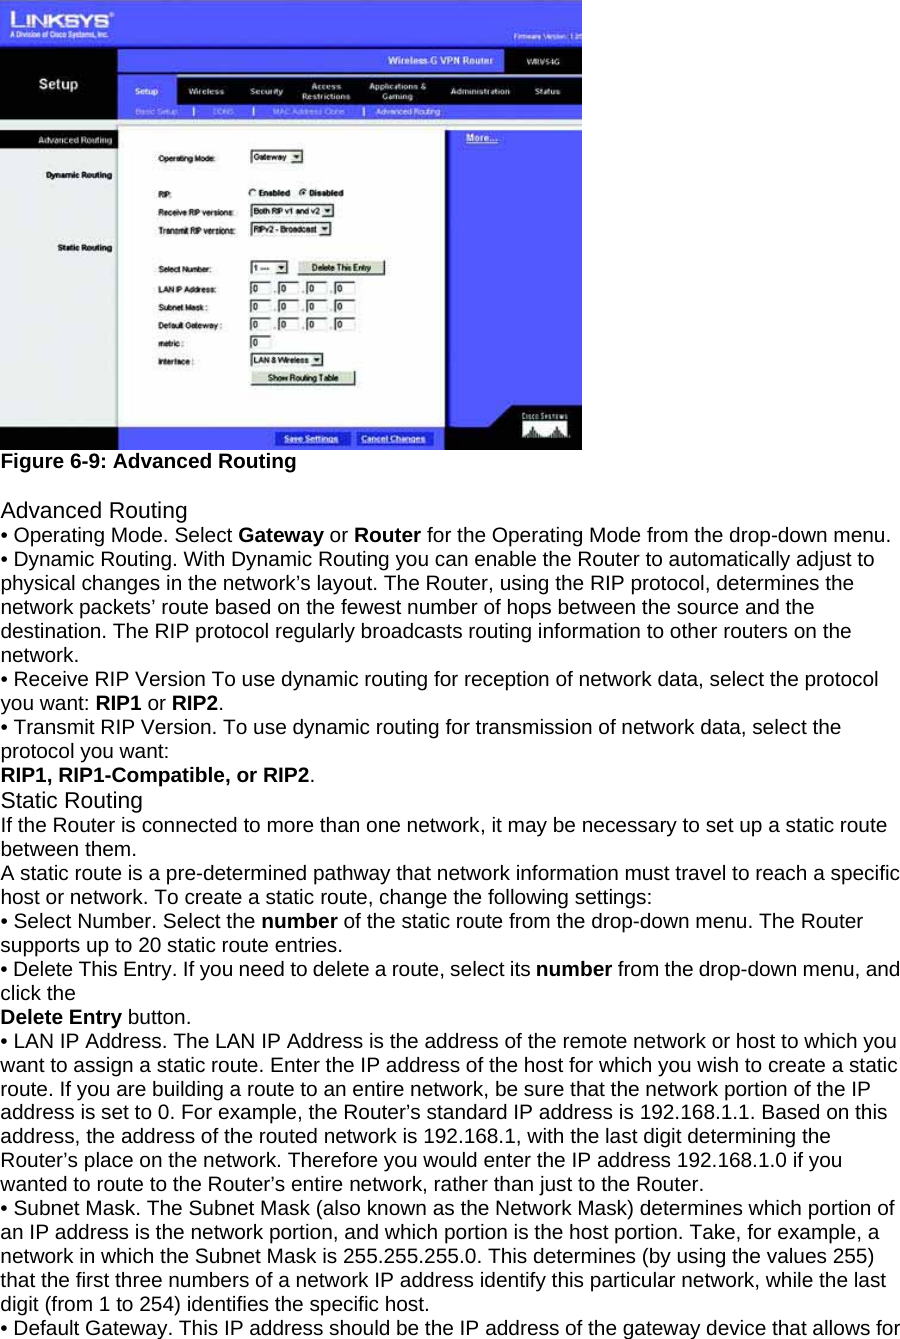  Figure 6-9: Advanced Routing  Advanced Routing • Operating Mode. Select Gateway or Router for the Operating Mode from the drop-down menu. • Dynamic Routing. With Dynamic Routing you can enable the Router to automatically adjust to physical changes in the network’s layout. The Router, using the RIP protocol, determines the network packets’ route based on the fewest number of hops between the source and the destination. The RIP protocol regularly broadcasts routing information to other routers on the network. • Receive RIP Version To use dynamic routing for reception of network data, select the protocol you want: RIP1 or RIP2. • Transmit RIP Version. To use dynamic routing for transmission of network data, select the protocol you want: RIP1, RIP1-Compatible, or RIP2. Static Routing If the Router is connected to more than one network, it may be necessary to set up a static route between them. A static route is a pre-determined pathway that network information must travel to reach a specific host or network. To create a static route, change the following settings: • Select Number. Select the number of the static route from the drop-down menu. The Router supports up to 20 static route entries. • Delete This Entry. If you need to delete a route, select its number from the drop-down menu, and click the Delete Entry button. • LAN IP Address. The LAN IP Address is the address of the remote network or host to which you want to assign a static route. Enter the IP address of the host for which you wish to create a static route. If you are building a route to an entire network, be sure that the network portion of the IP address is set to 0. For example, the Router’s standard IP address is 192.168.1.1. Based on this address, the address of the routed network is 192.168.1, with the last digit determining the Router’s place on the network. Therefore you would enter the IP address 192.168.1.0 if you wanted to route to the Router’s entire network, rather than just to the Router. • Subnet Mask. The Subnet Mask (also known as the Network Mask) determines which portion of an IP address is the network portion, and which portion is the host portion. Take, for example, a network in which the Subnet Mask is 255.255.255.0. This determines (by using the values 255) that the first three numbers of a network IP address identify this particular network, while the last digit (from 1 to 254) identifies the specific host. • Default Gateway. This IP address should be the IP address of the gateway device that allows for 